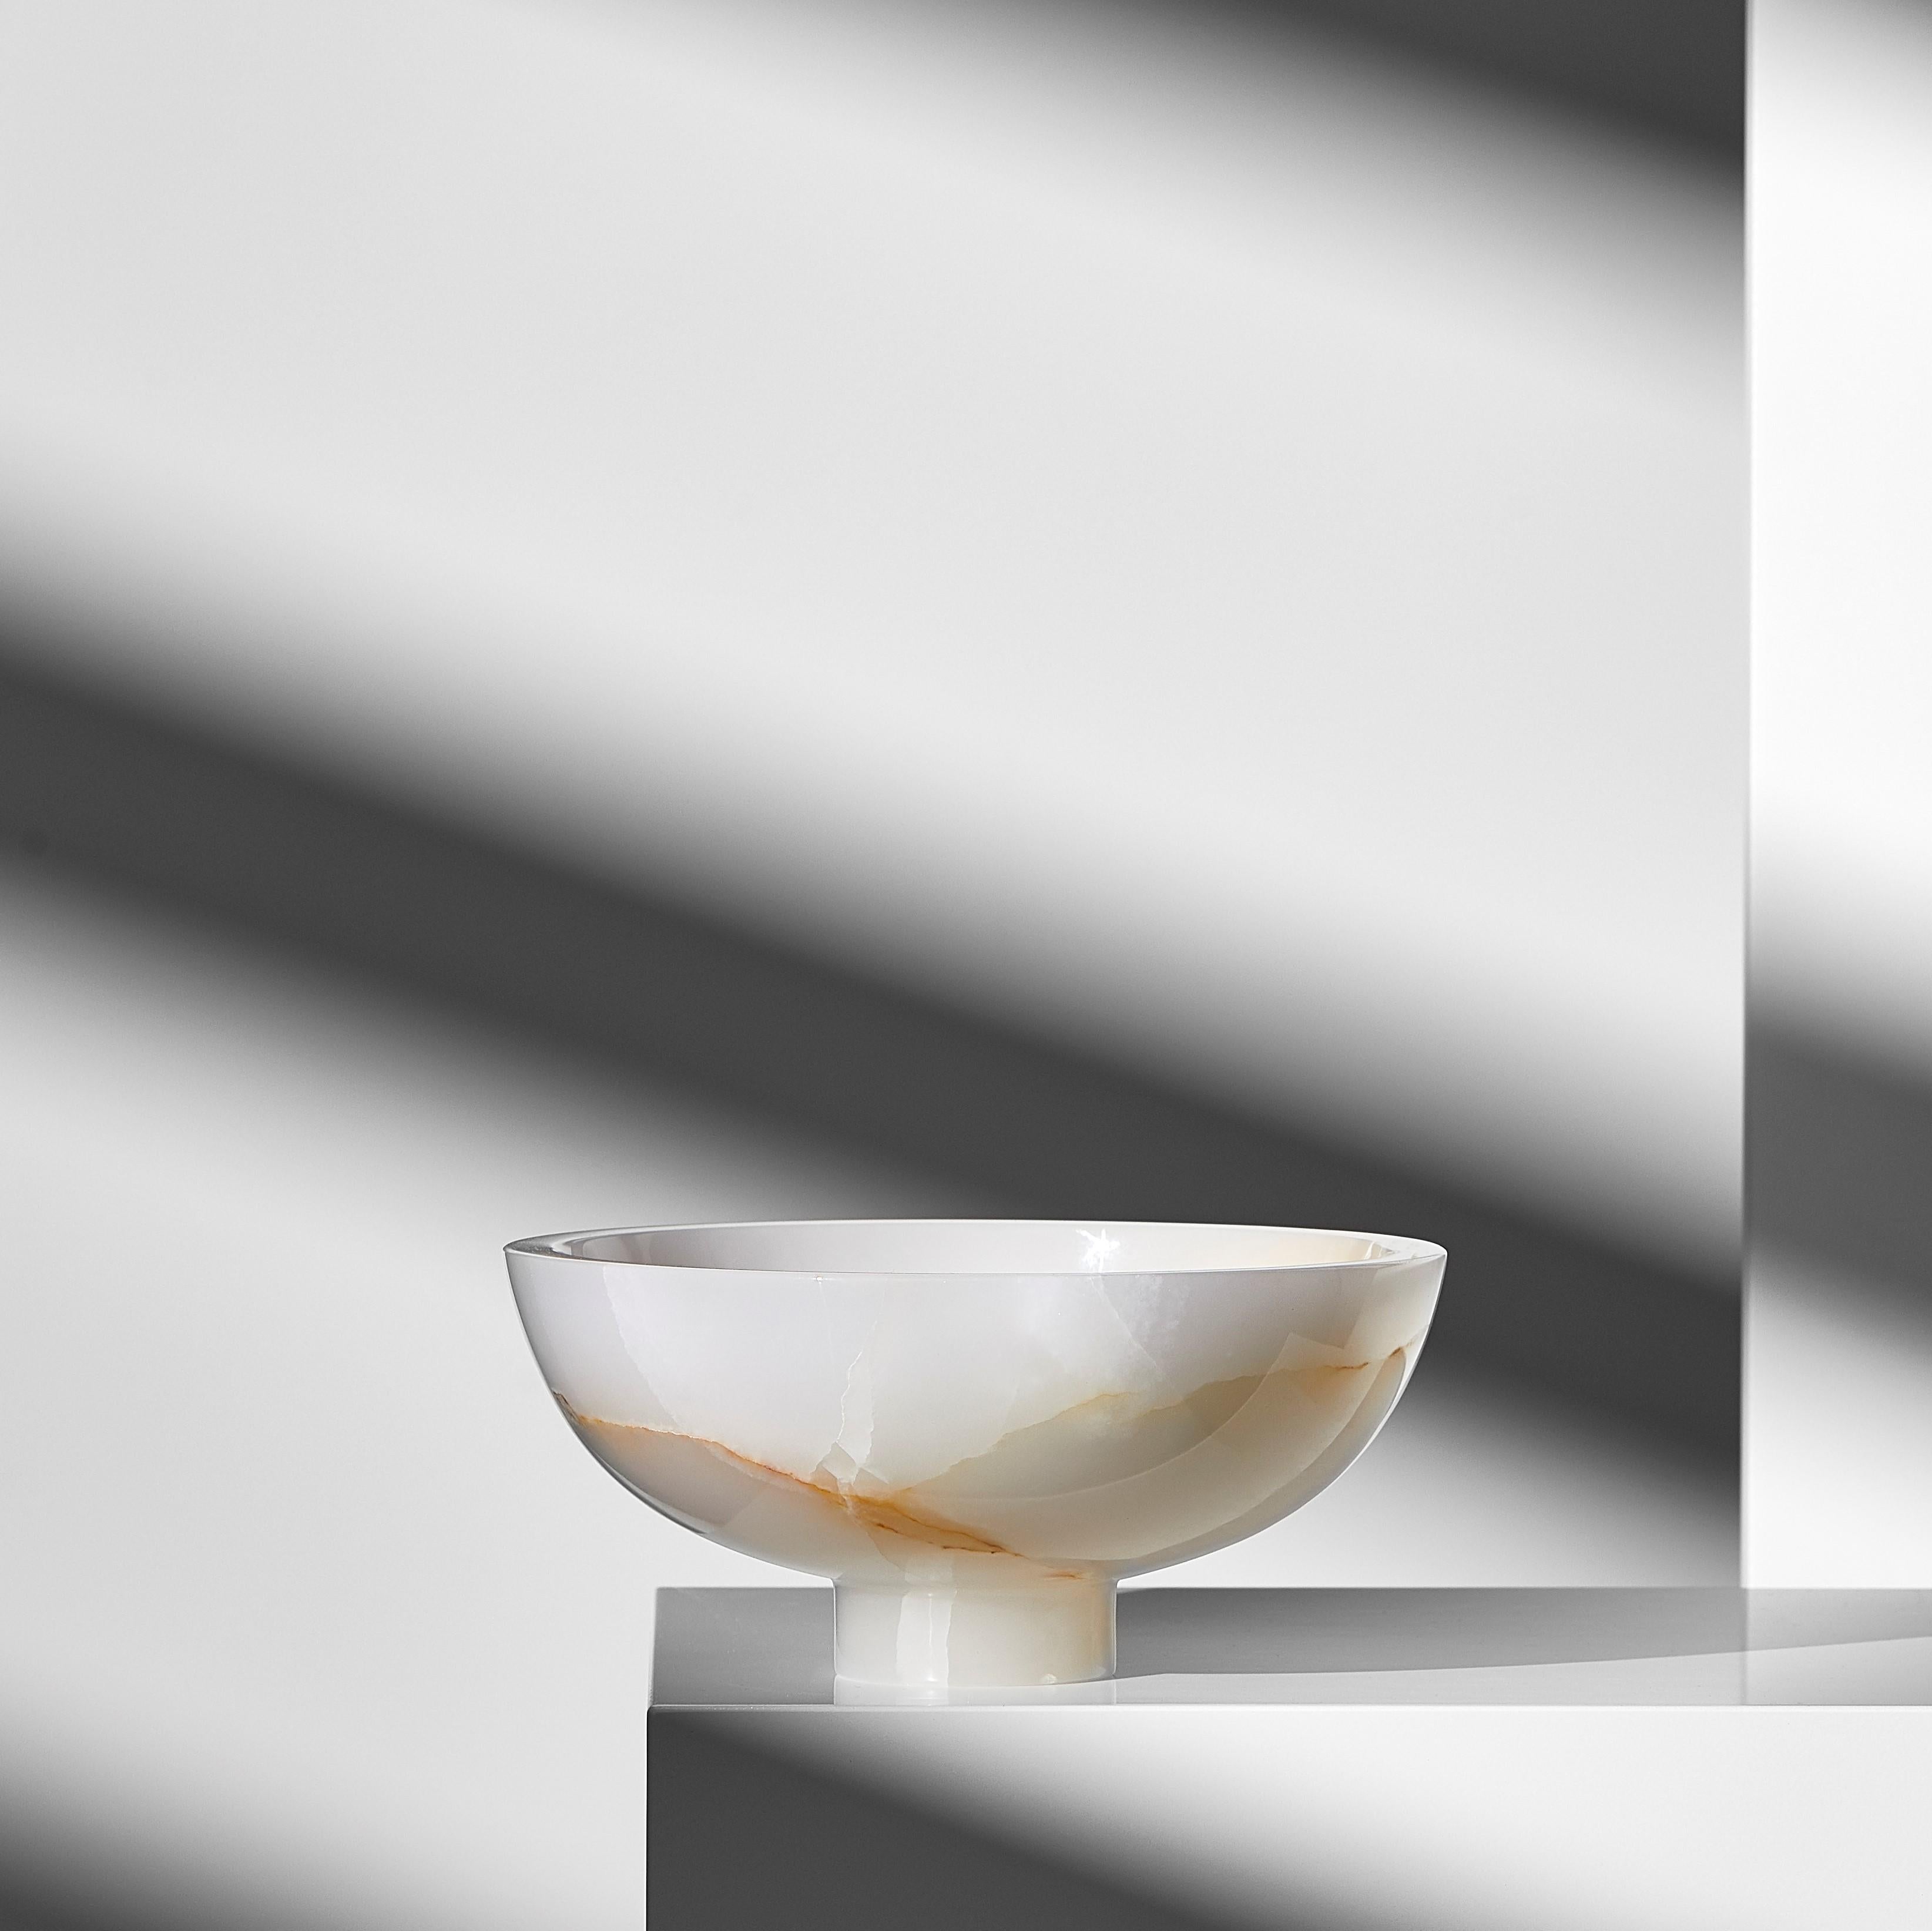 Twosidestory bowl by Lisette Rützou
Dimensions: D 20 cm
Materials: Onyx

 Lisette Rützou’s design is motivated by an urge to articulate a story. Inspired by the beauty of materials, form and architecture, each design is an independent statement